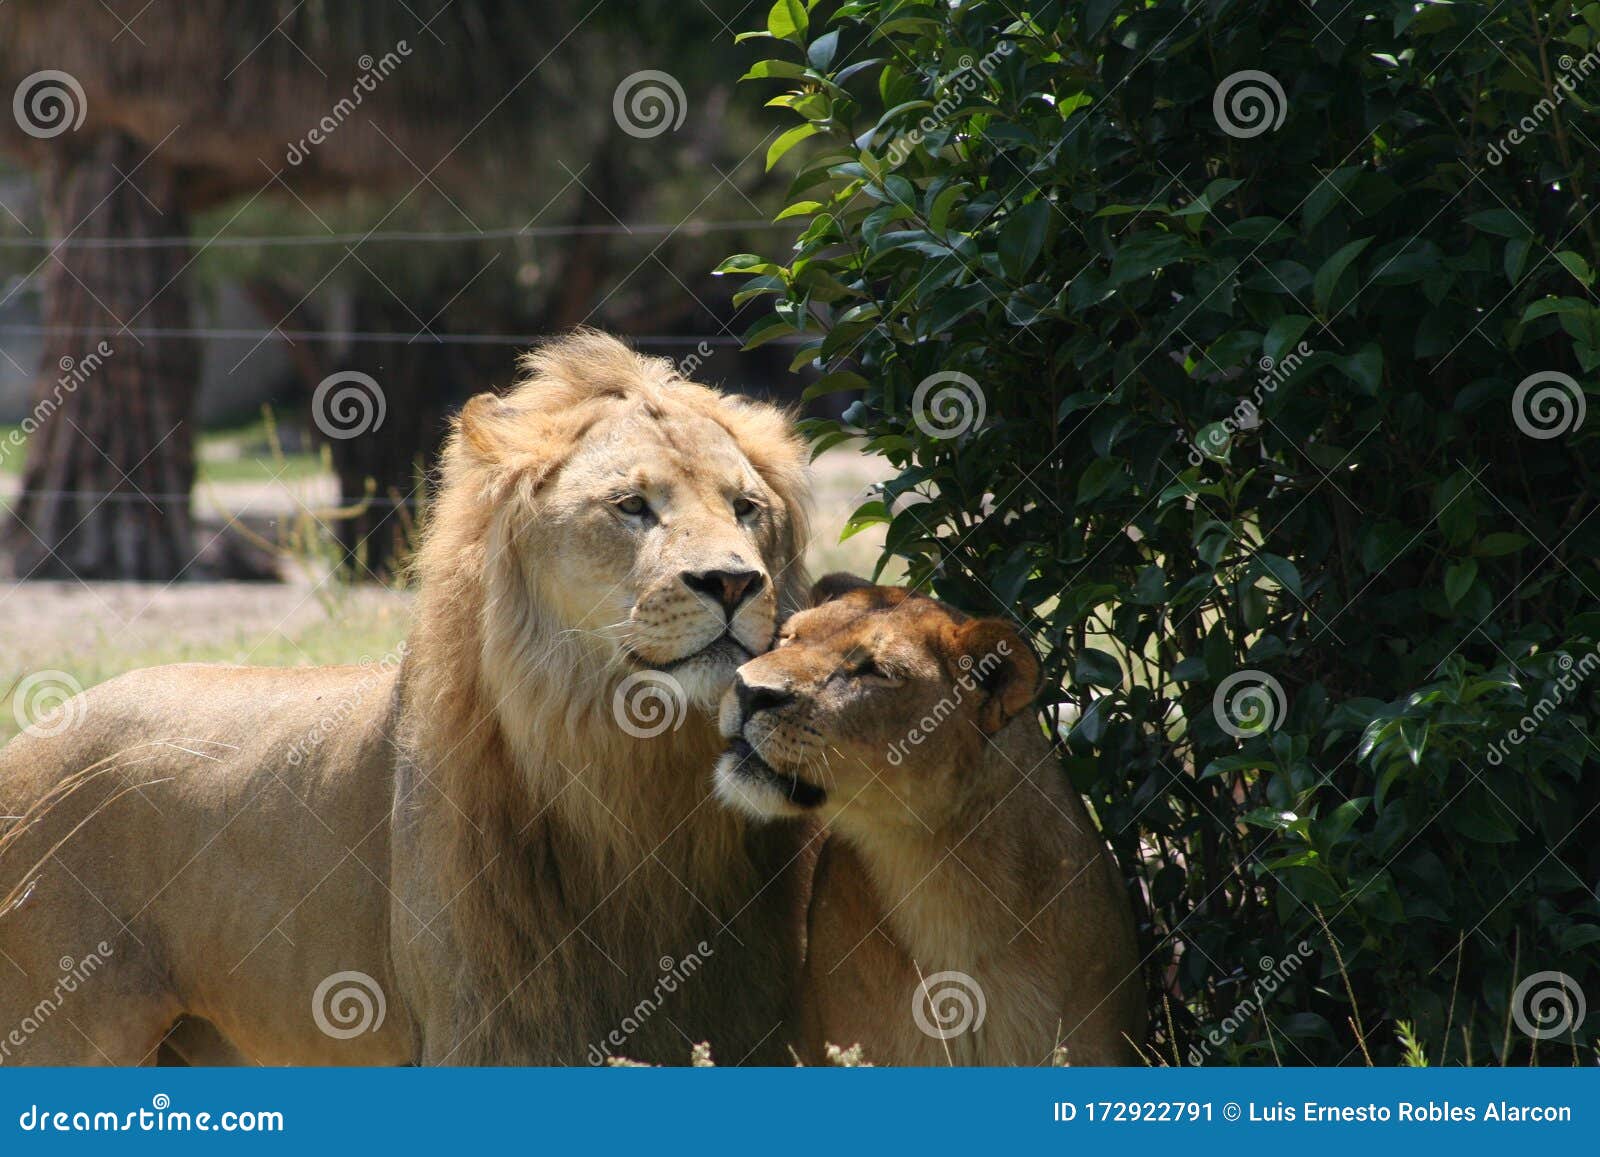 Couple of Lions Wild Life Animals in Jungle Zoo Stock Image - Image of  male, savannas: 172922791